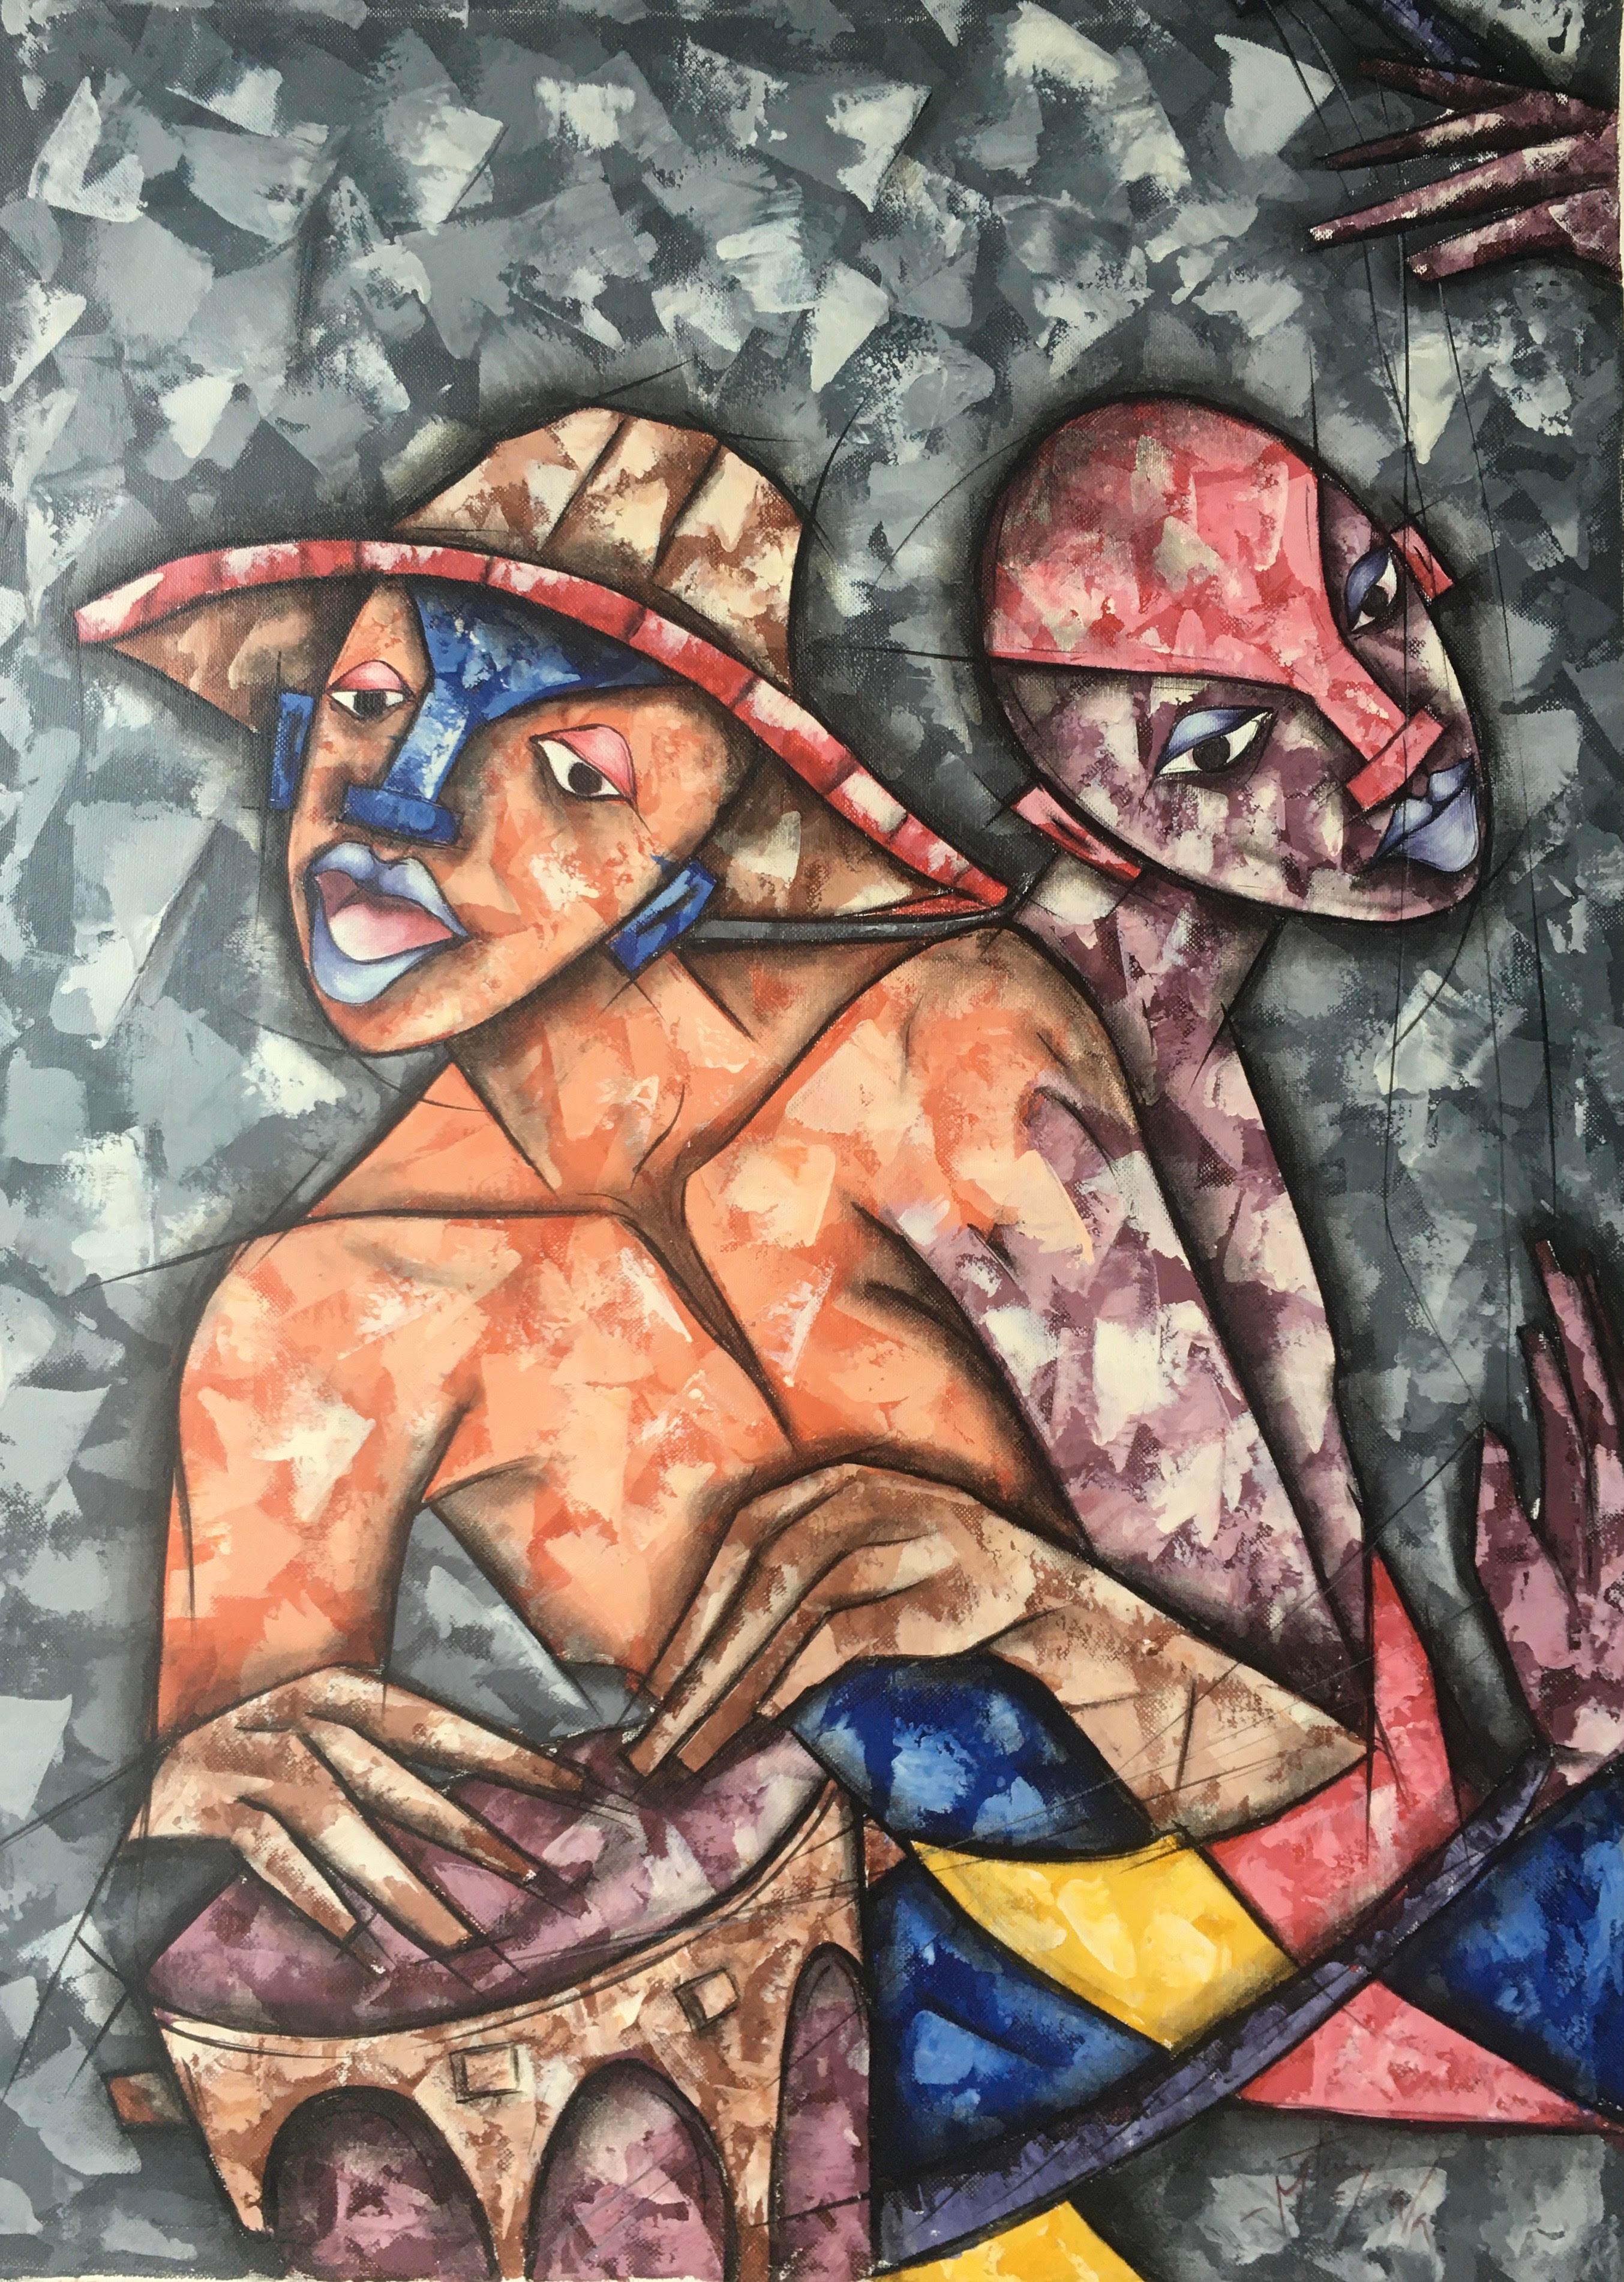 Music keeps your hope - Painting by Mtambala